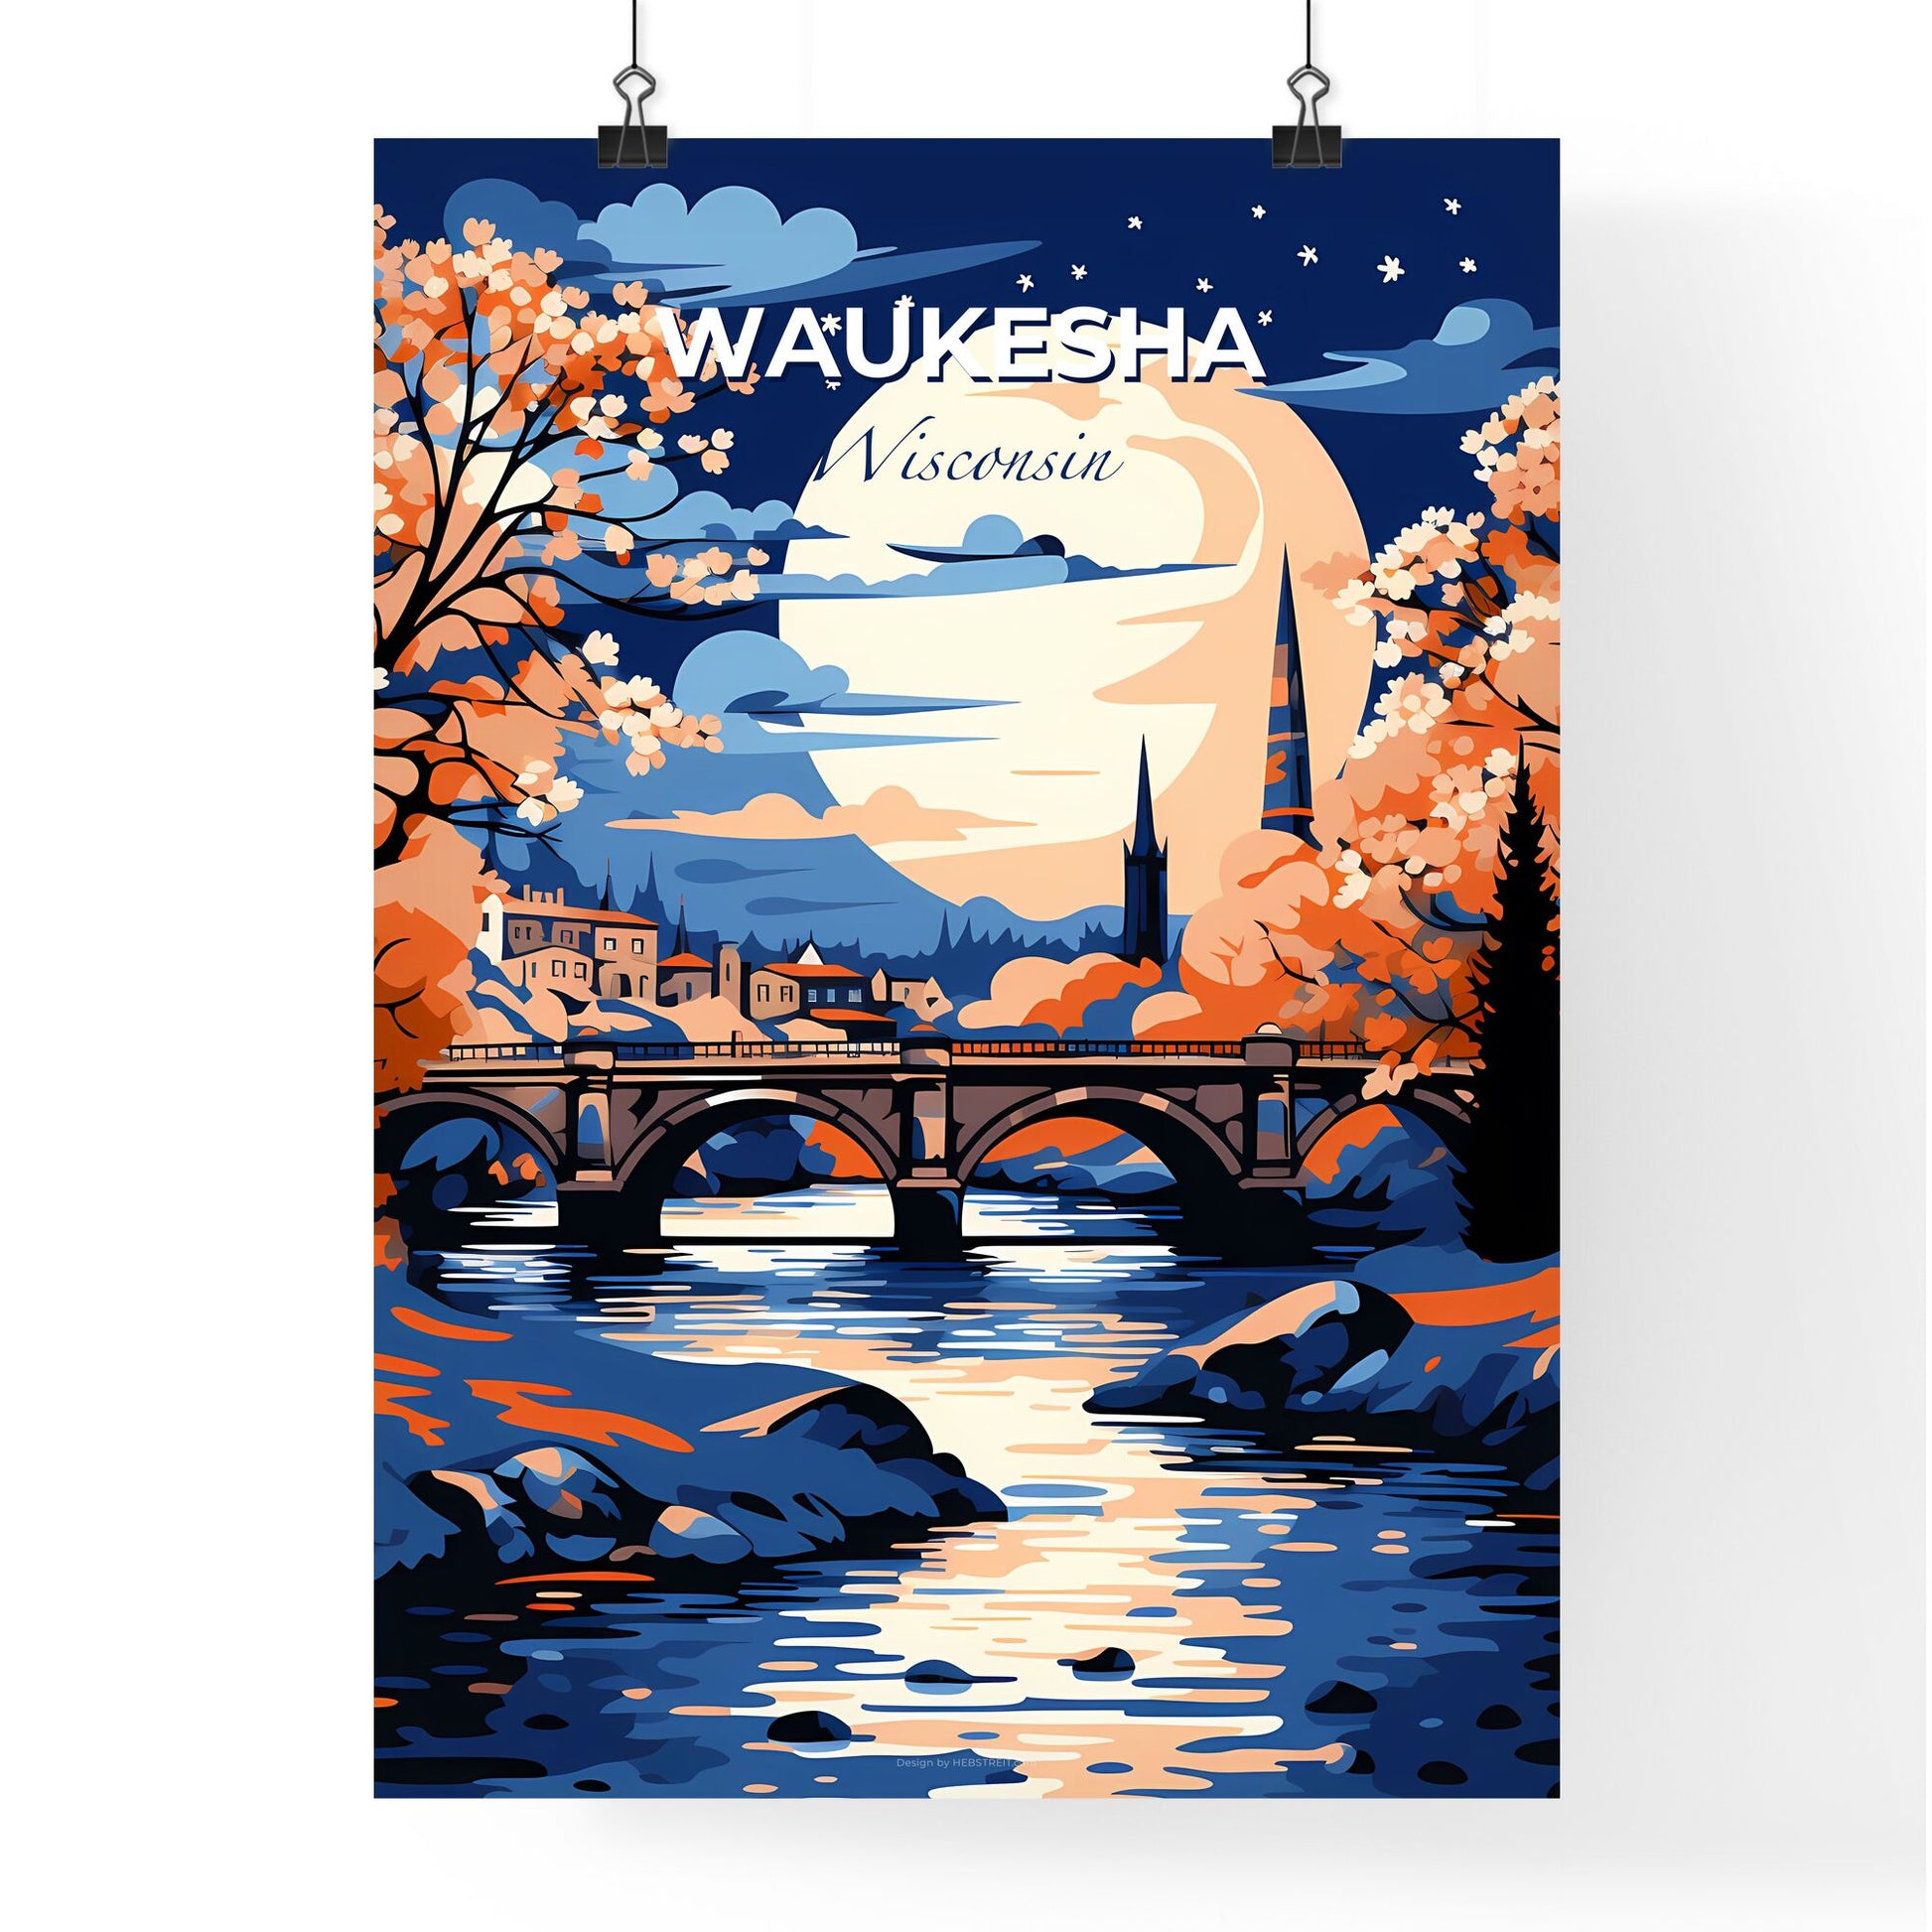 Waukesha, Wisconsin, A Poster of a painting of a bridge over a river Default Title